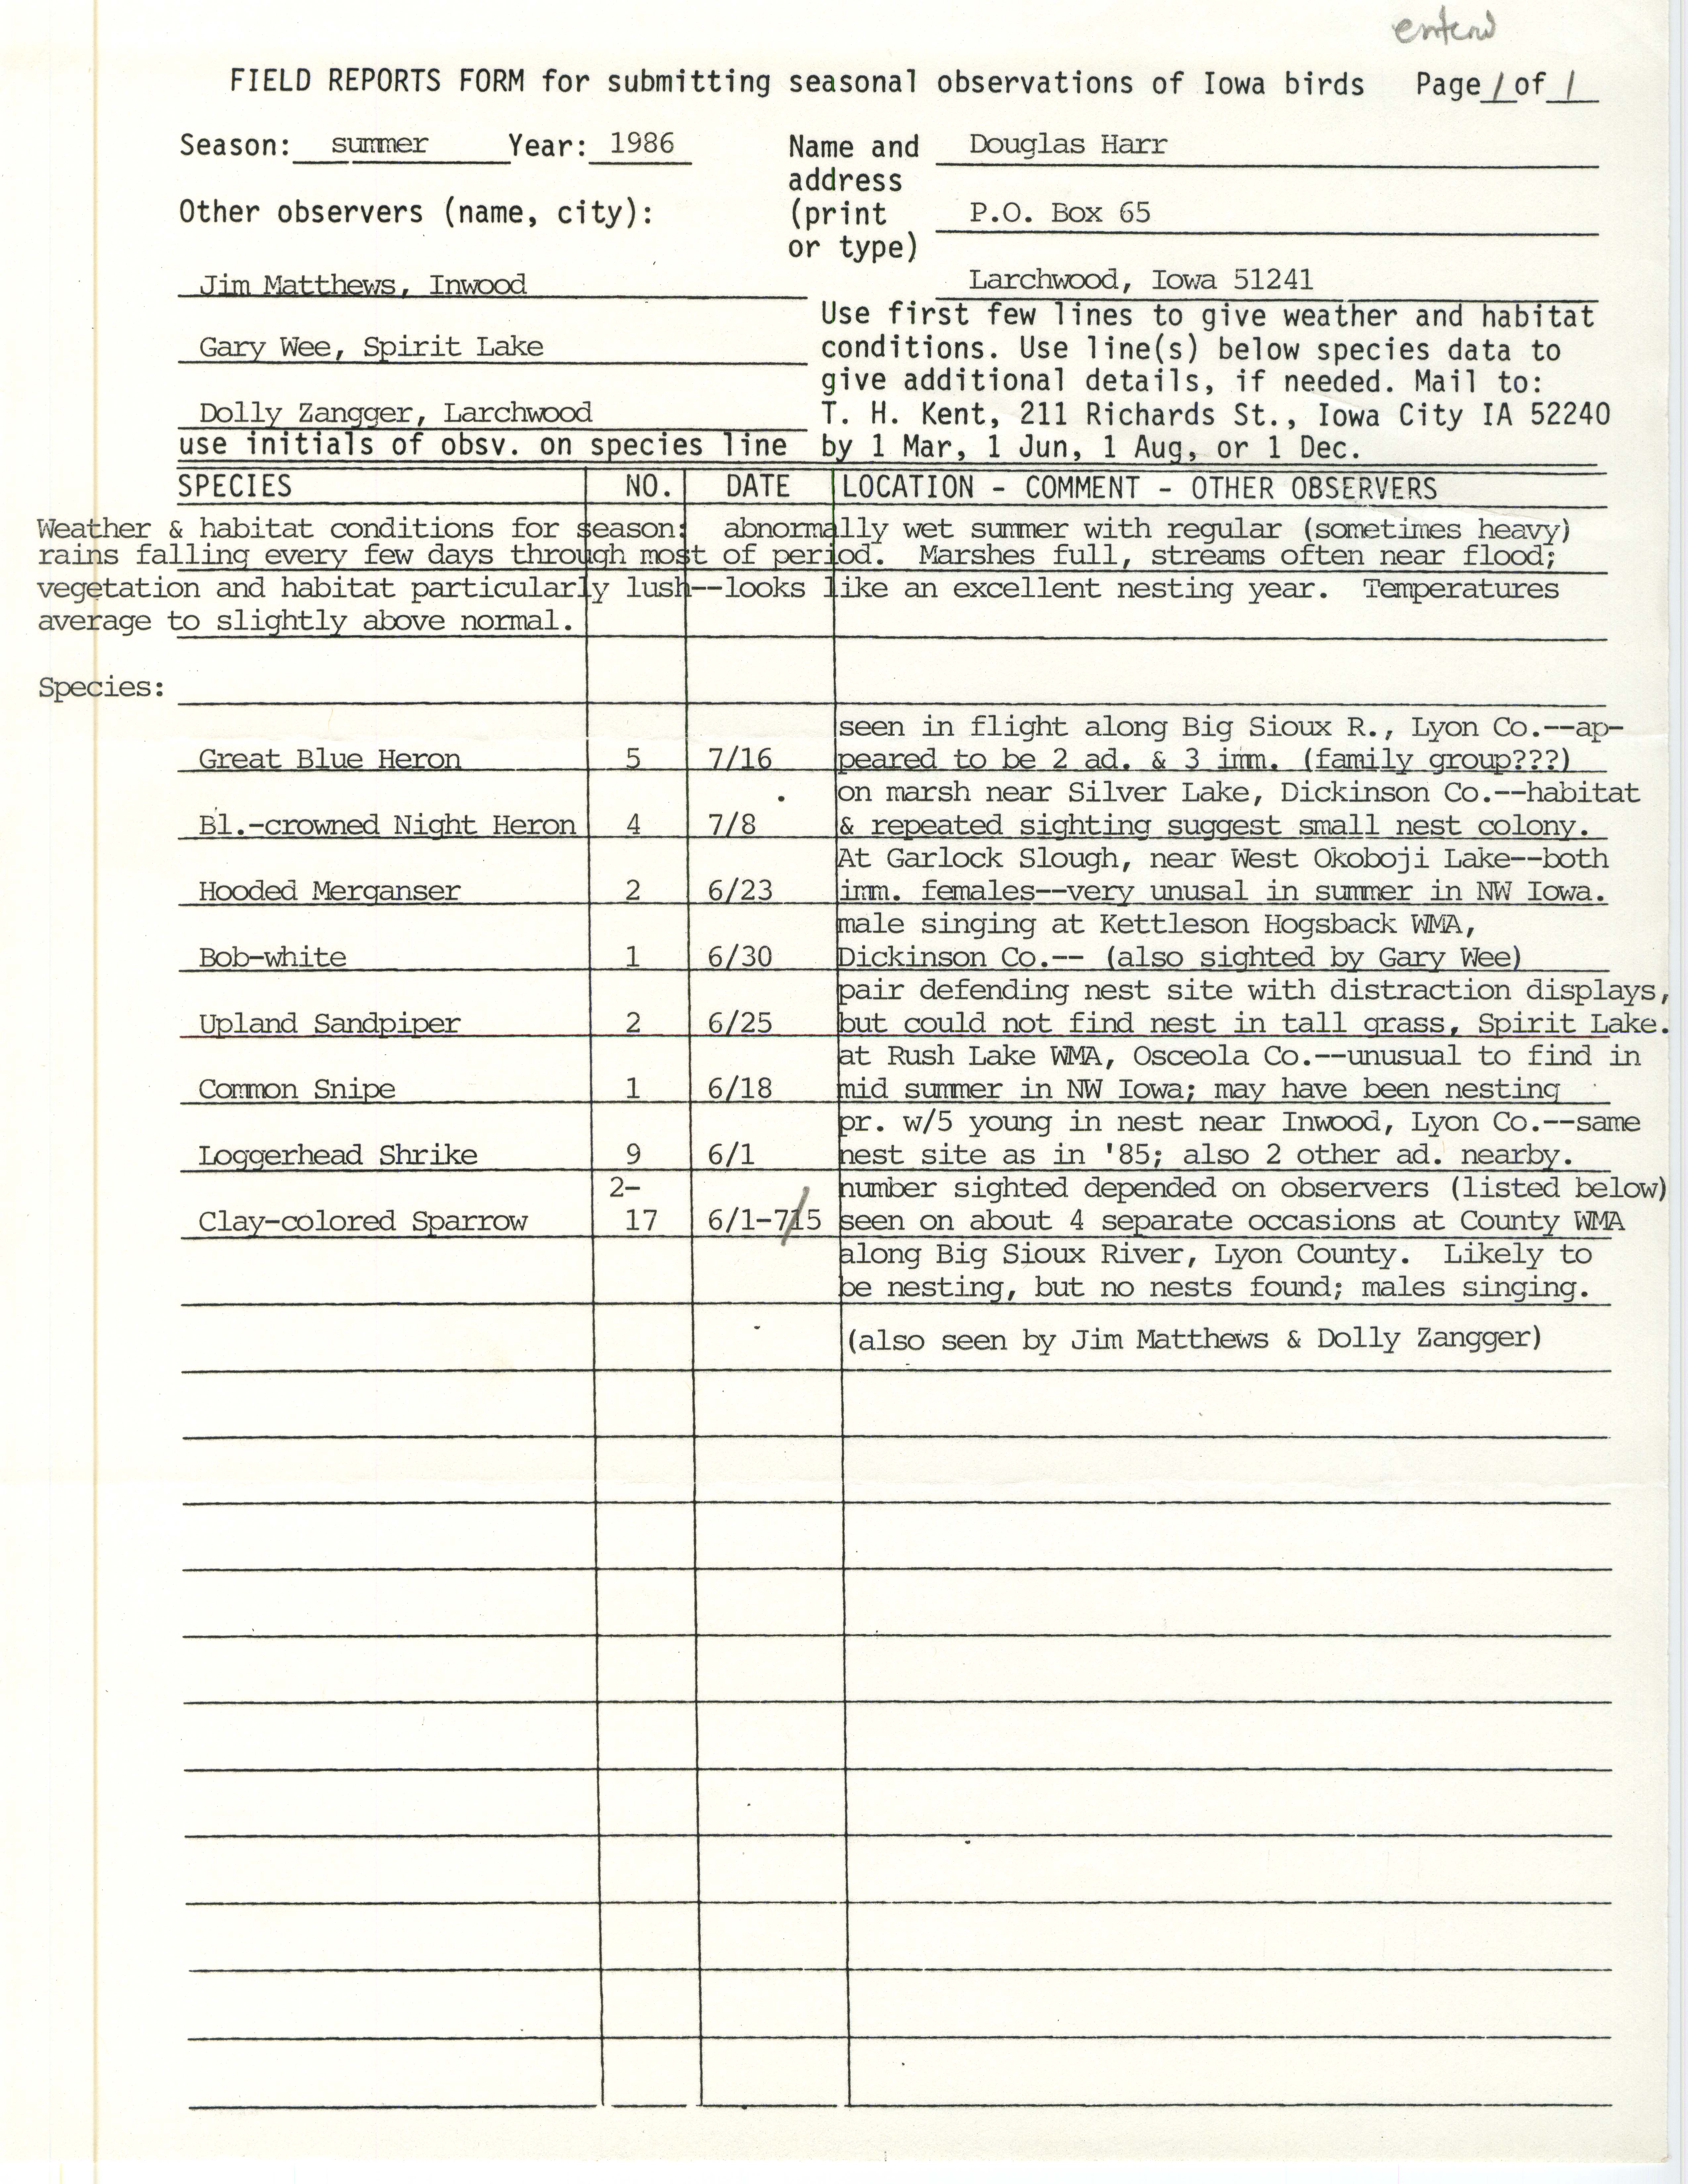 Field reports form for submitting seasonal observations of Iowa birds, Douglas C. Harr, summer 1986